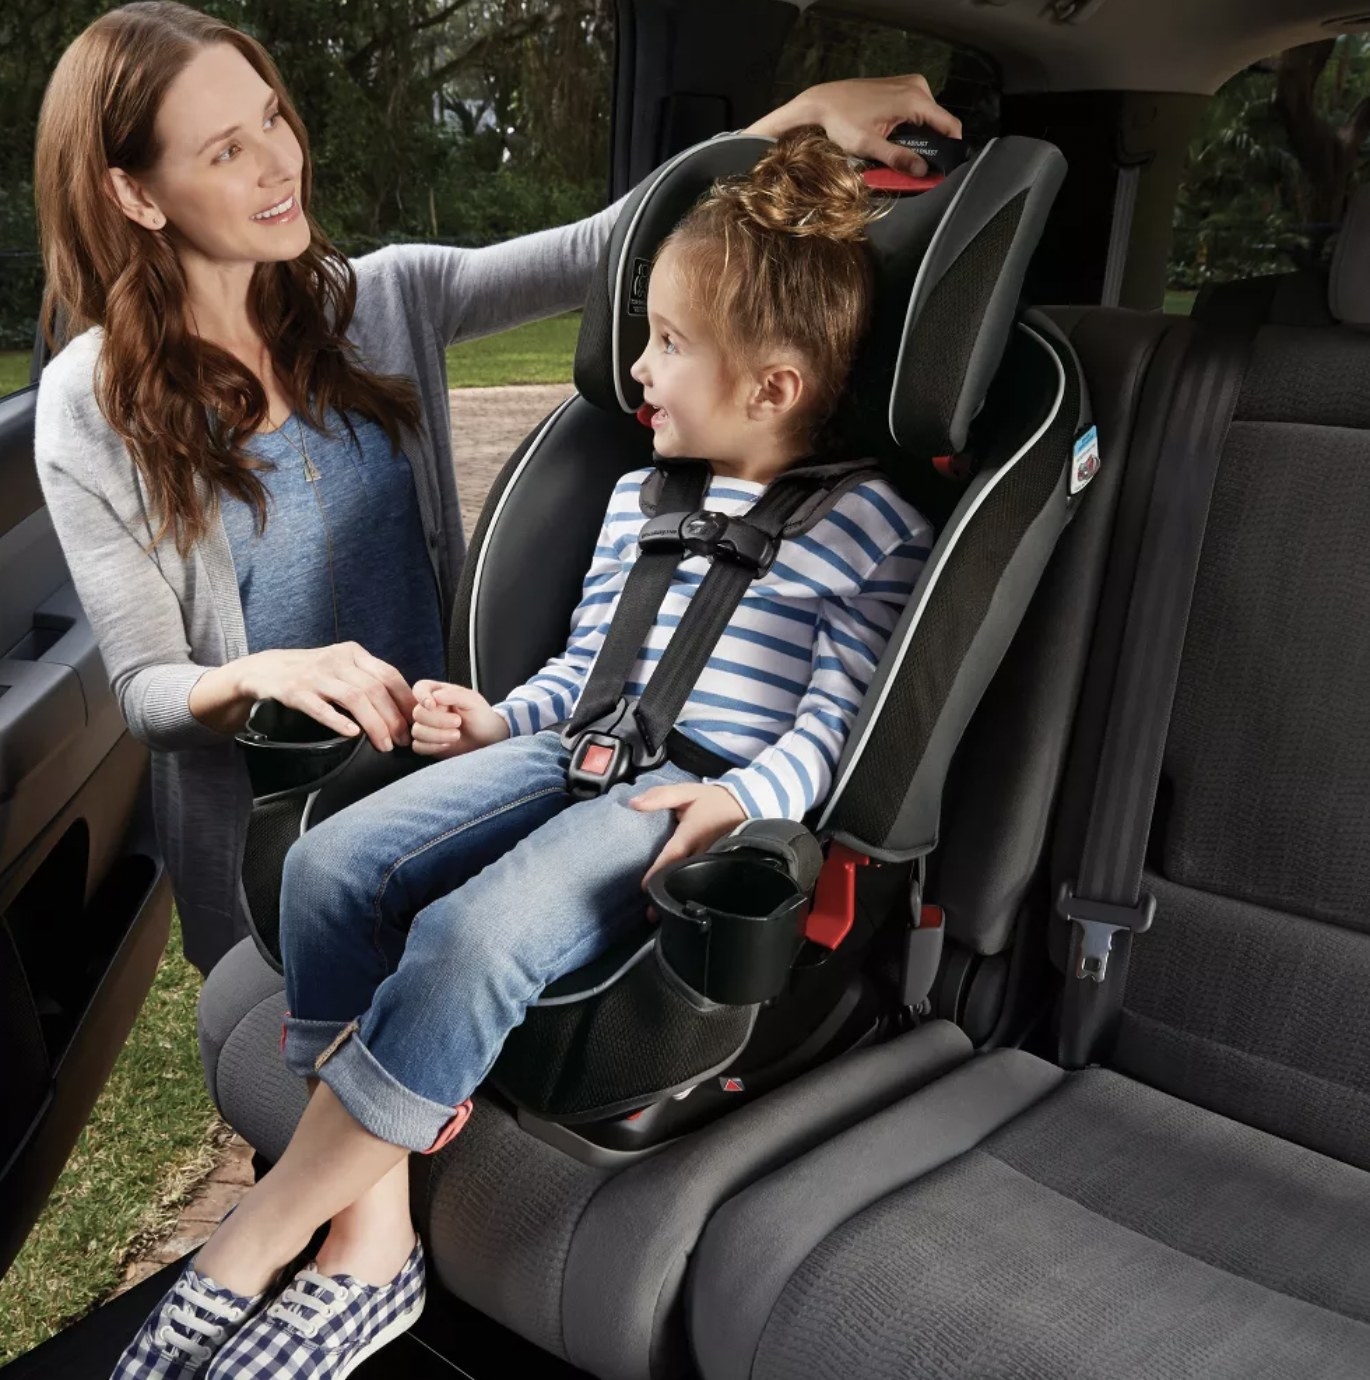 Adult buckling child into car seat with forward-facing harness